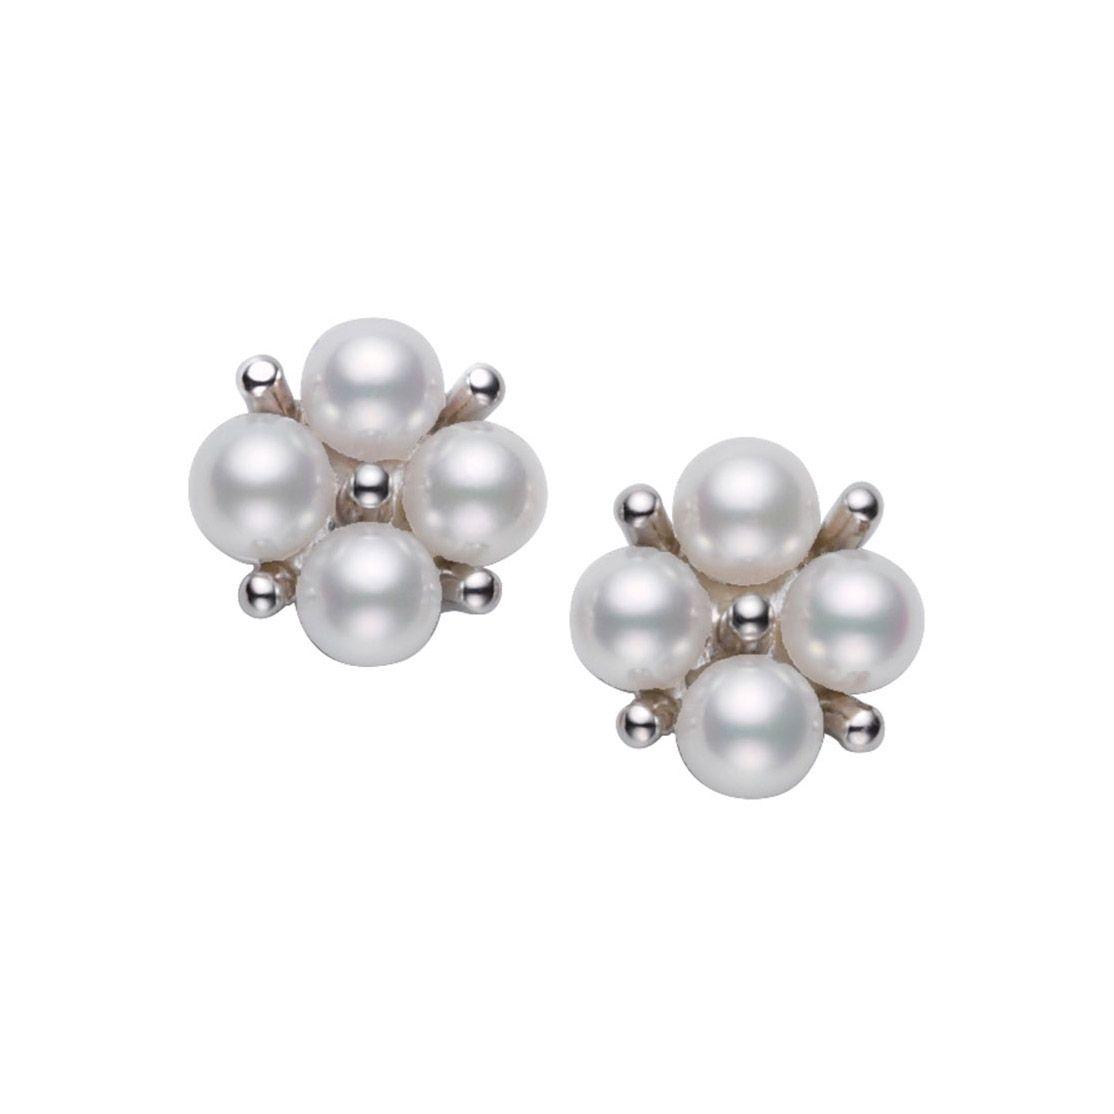 Mikimoto "A+" Akoya Cultured Pearl and White Gold Cluster Earrings